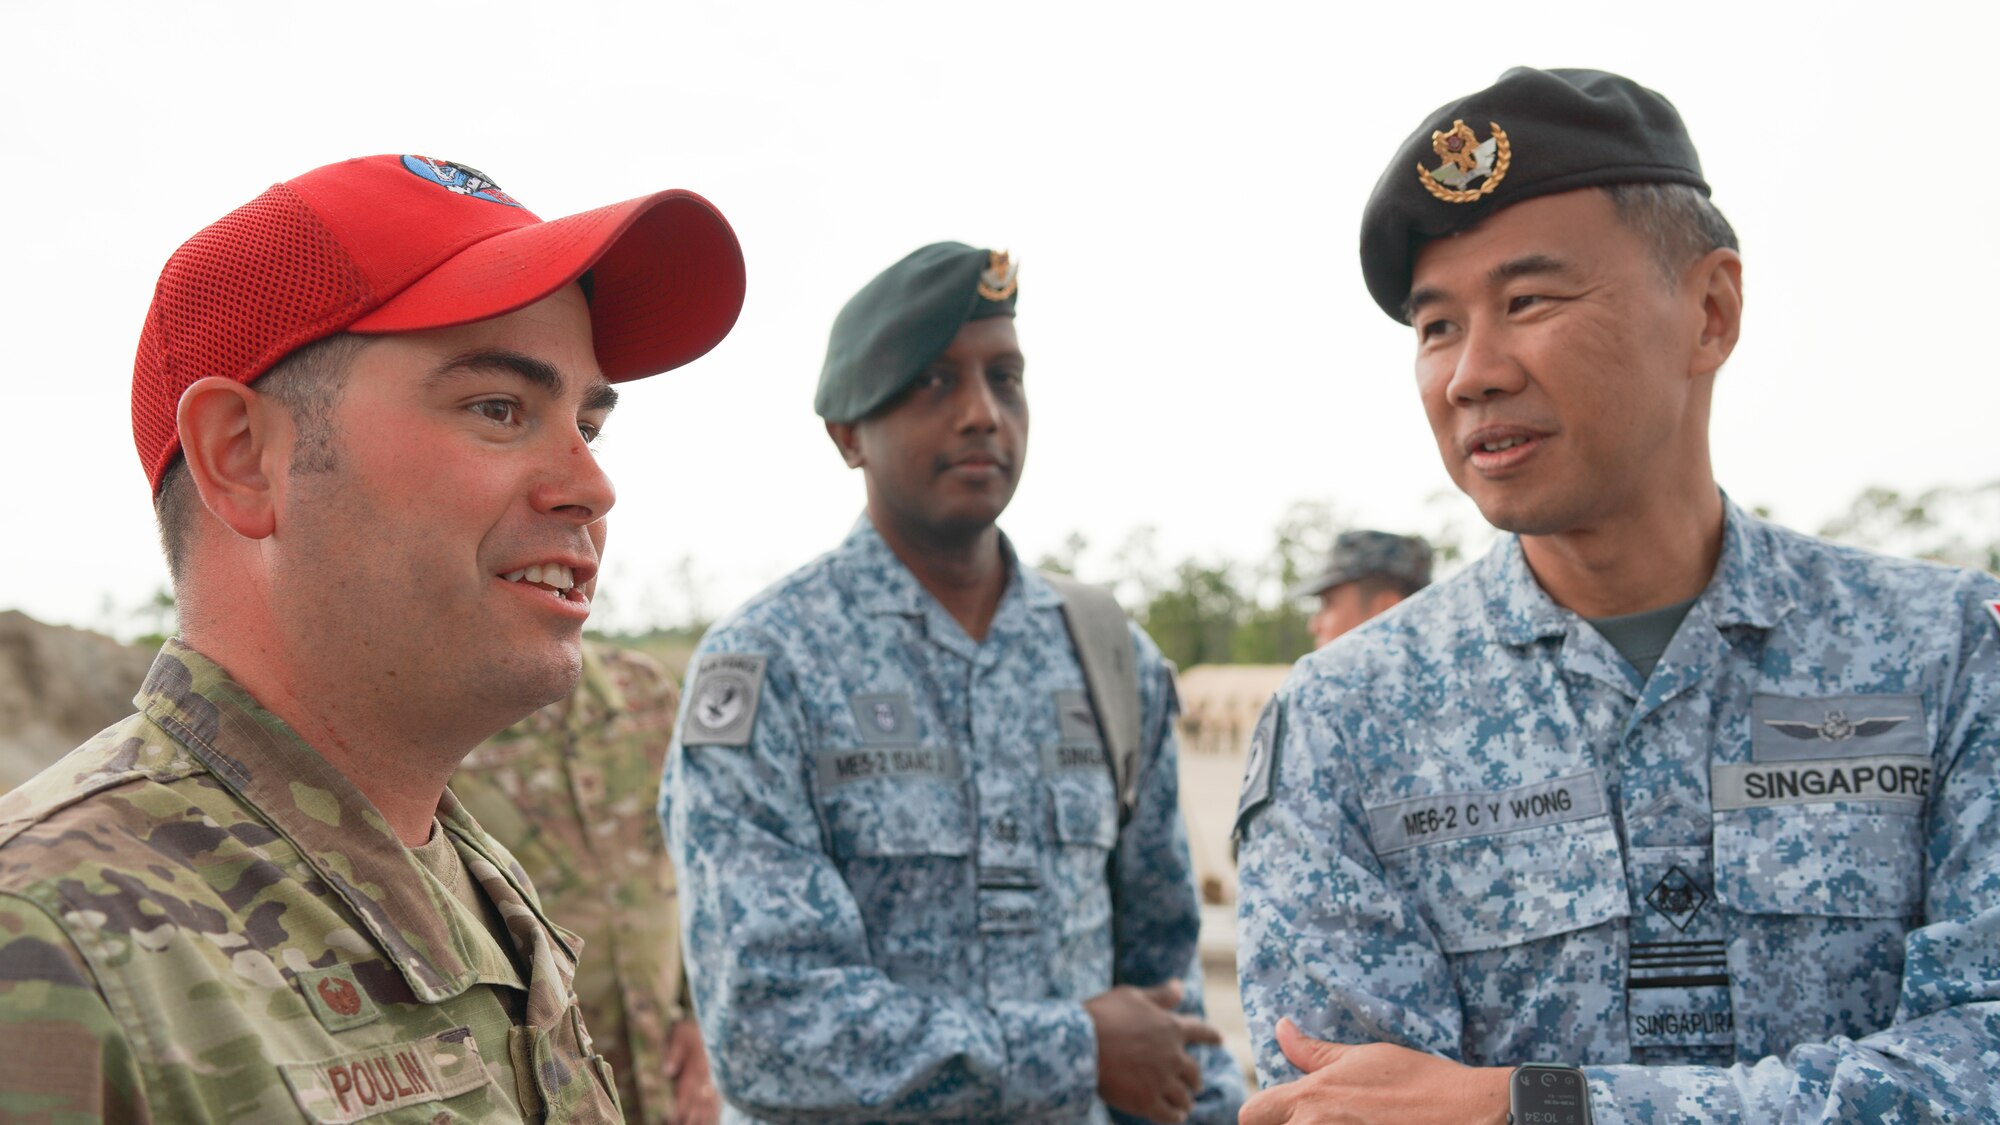 Lt. Col. Craig Poulin, 801st RED HORSE Training Squadron Commander, speaks with Singapore civil engineers, Military Expert (ME) 6 Wong Chee Yuen and ME 5 Isaac Joseph, at Readiness Challenge IX at Tyndall Air Force Base, Florida April 24-28, 2023. This year’s Readiness Challenge tested civil engineer contingency skills while operating in contested and degraded environments, strengthening their posture for the future fight. It was also an opportunity to promote multilateral cooperation and relationship-building between partner nations in attendance. (U.S. Air Force photo by HAF/A4C Strategic Communications)